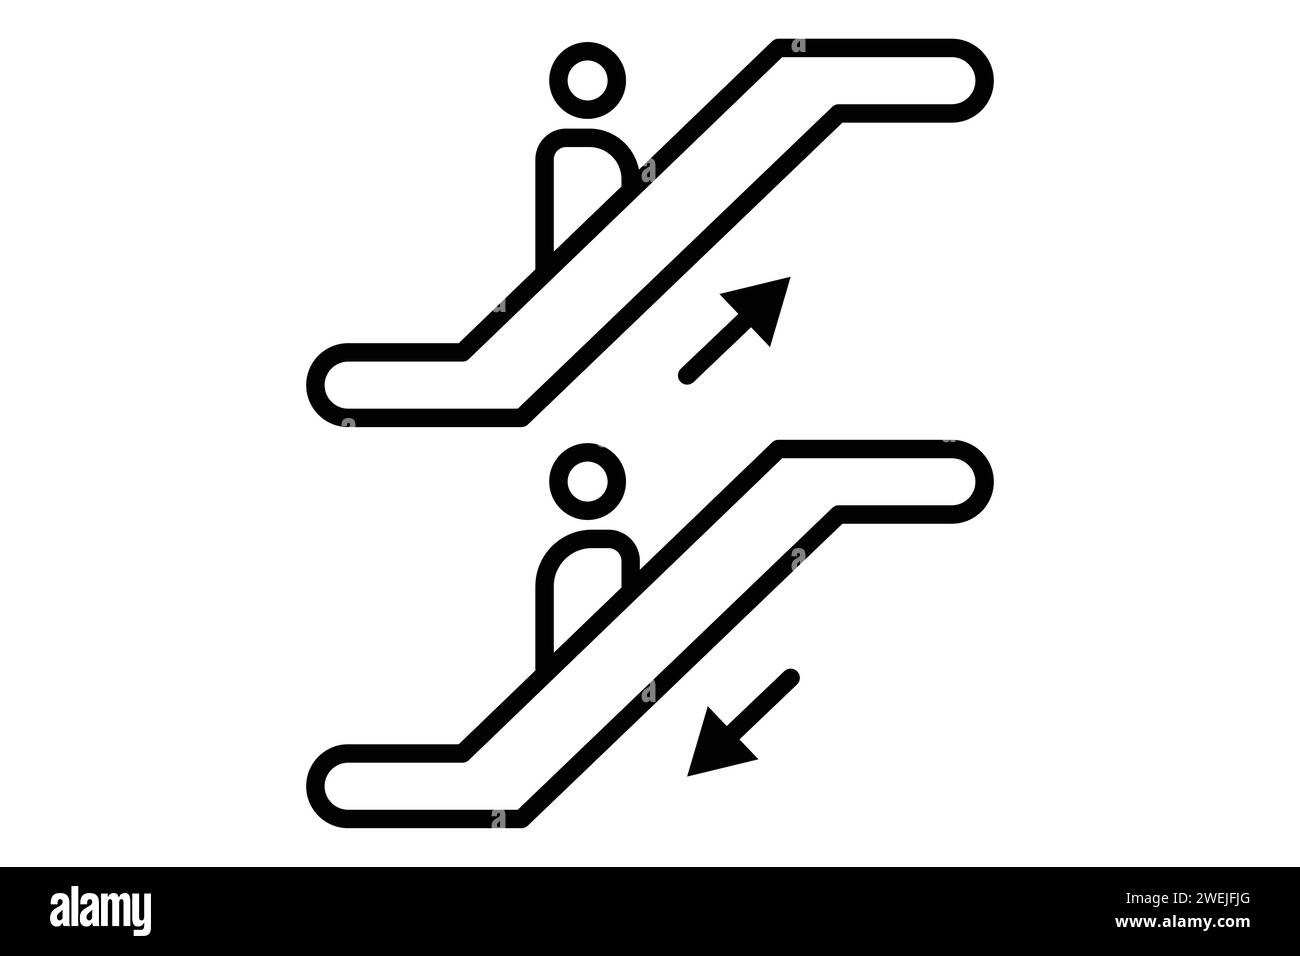 escalator icon. icon related to indoor navigation in public spaces. line icon style. element illustration Stock Vector